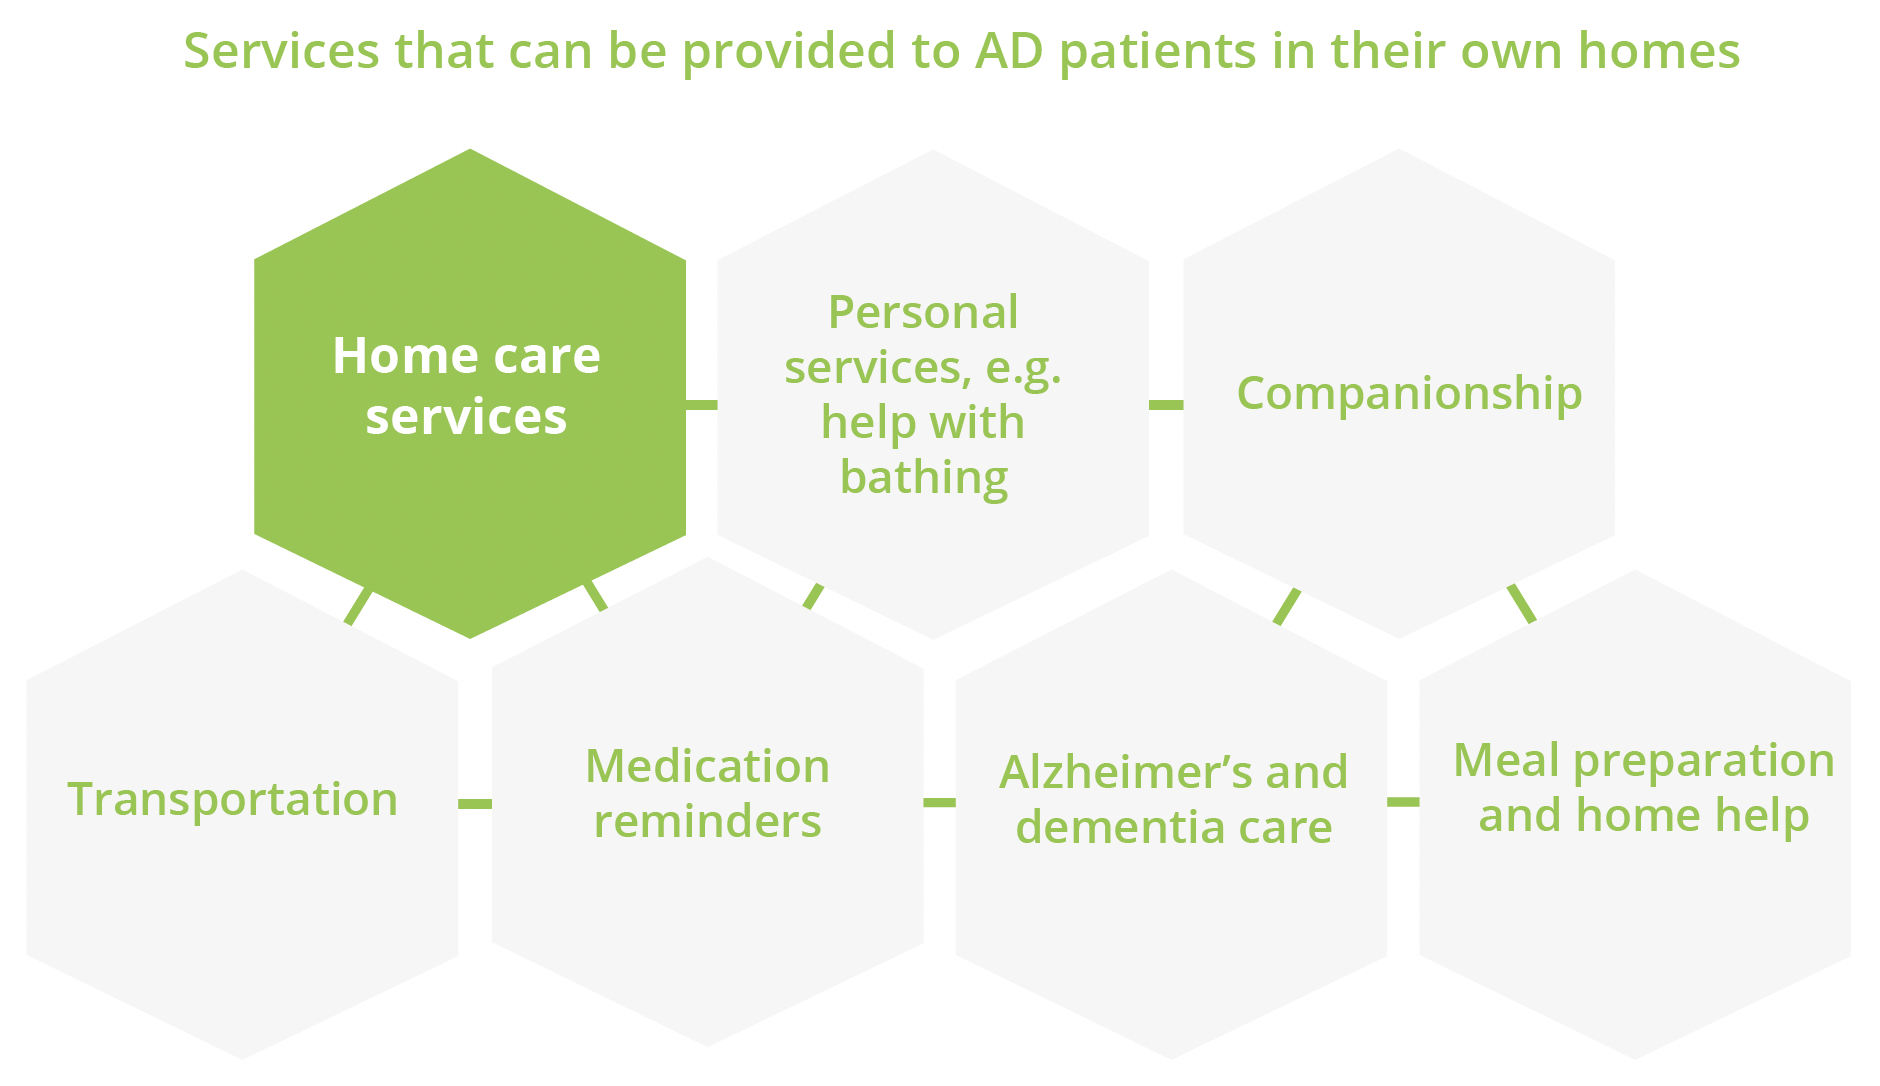 Six home care services that can be provided to AD patients